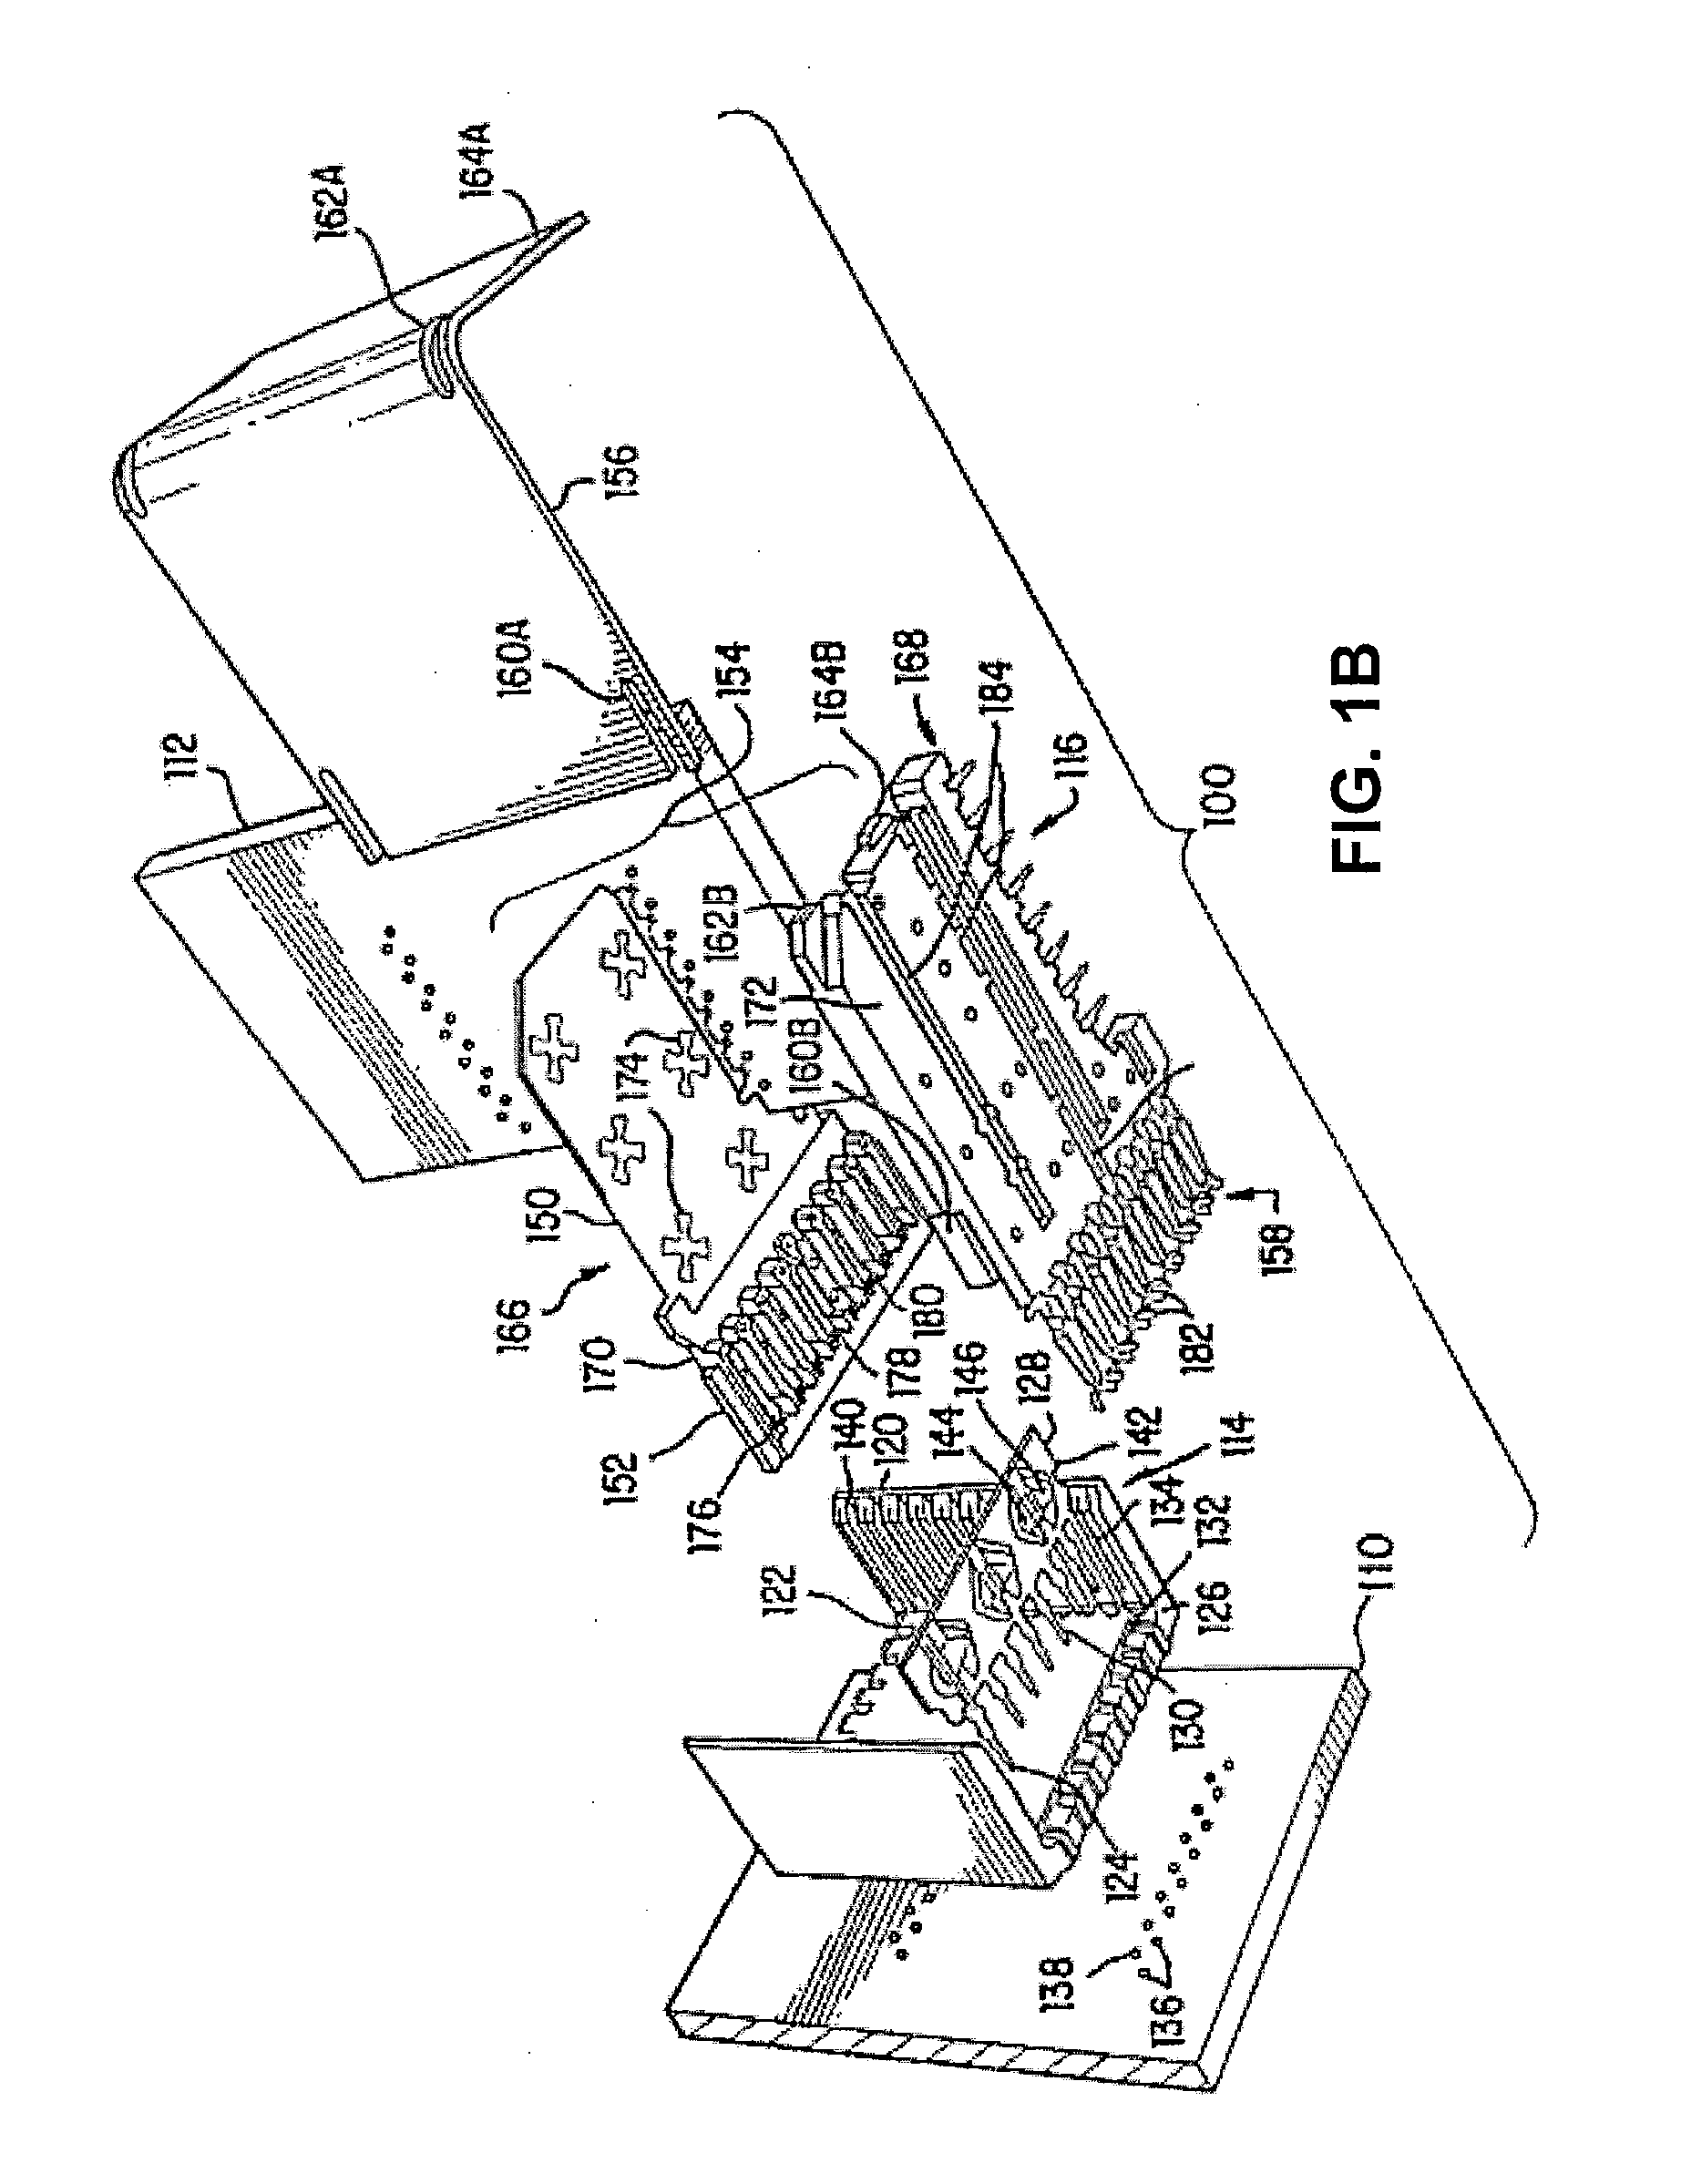 High speed, high density electrical connector with shielded signal paths